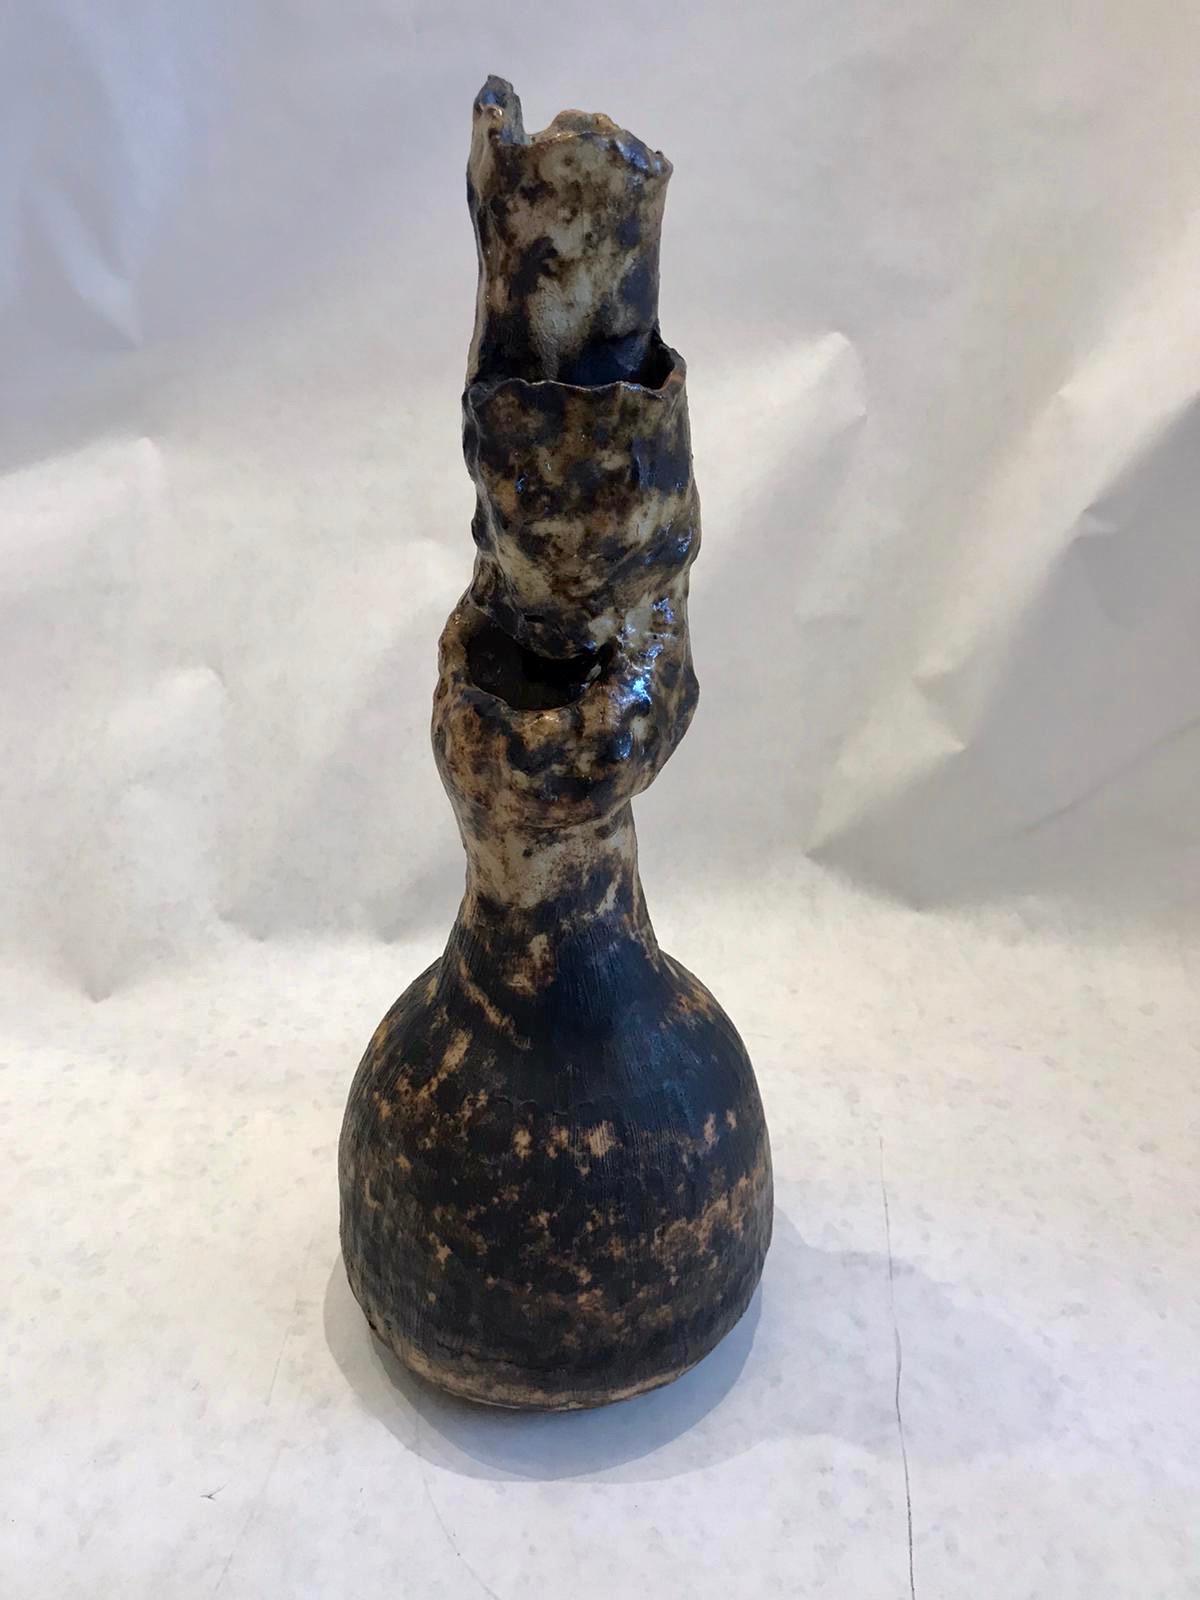 Lava glazed, extremely unique, this tall Studio Pottery vase has several openings to the sides of the neck piece. The large gourd-like base holds water for flowers, branches, etc. Earth tones and very chunky.